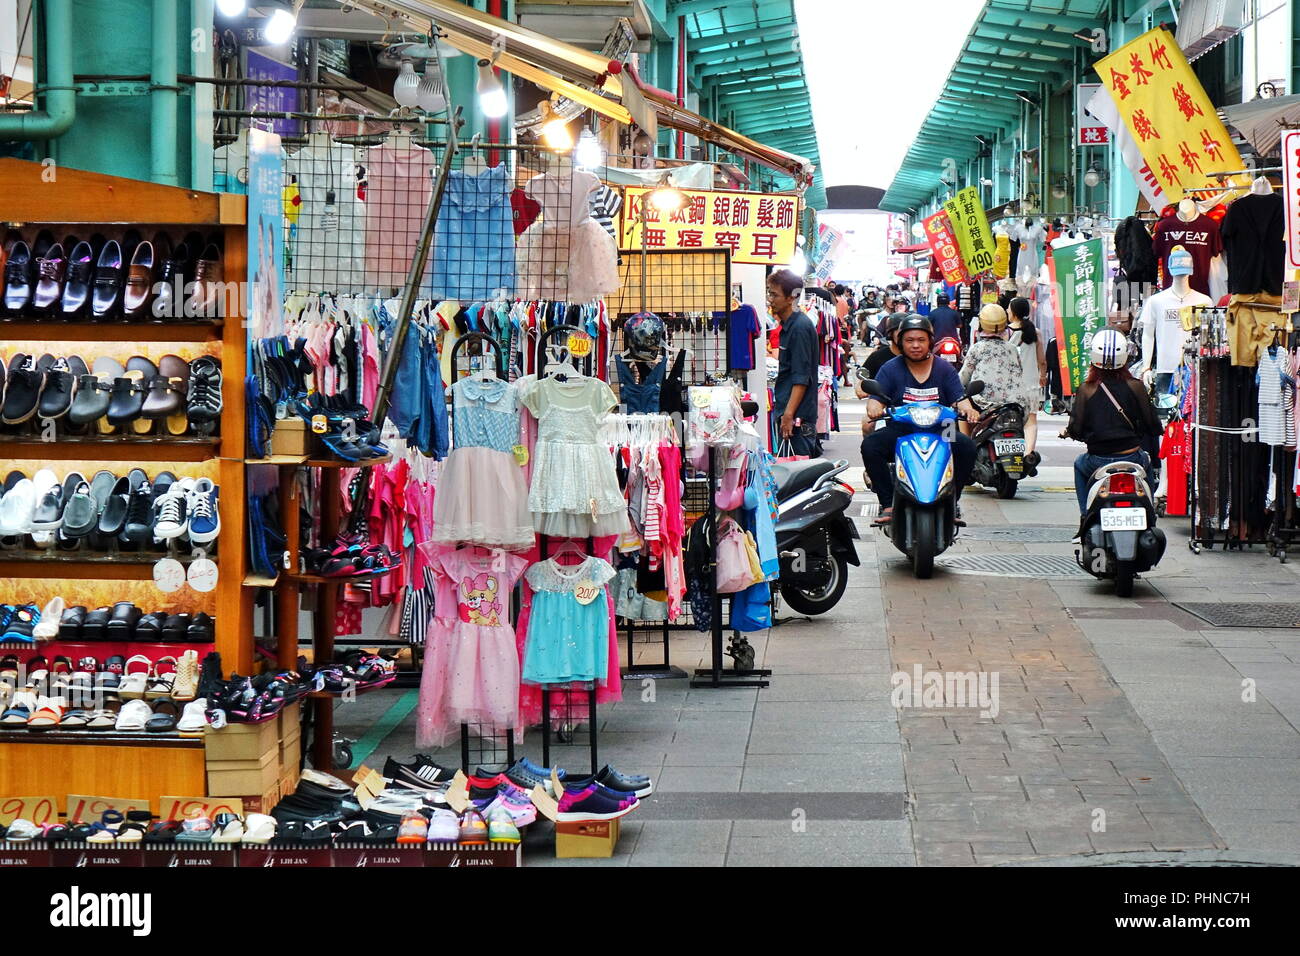 KAOHSIUNG, TAIWAN -- AUGUST 18, 2018: The Nan Hua tourist market sells mainly affordable clothing and shoes for cildren and young people. Stock Photo